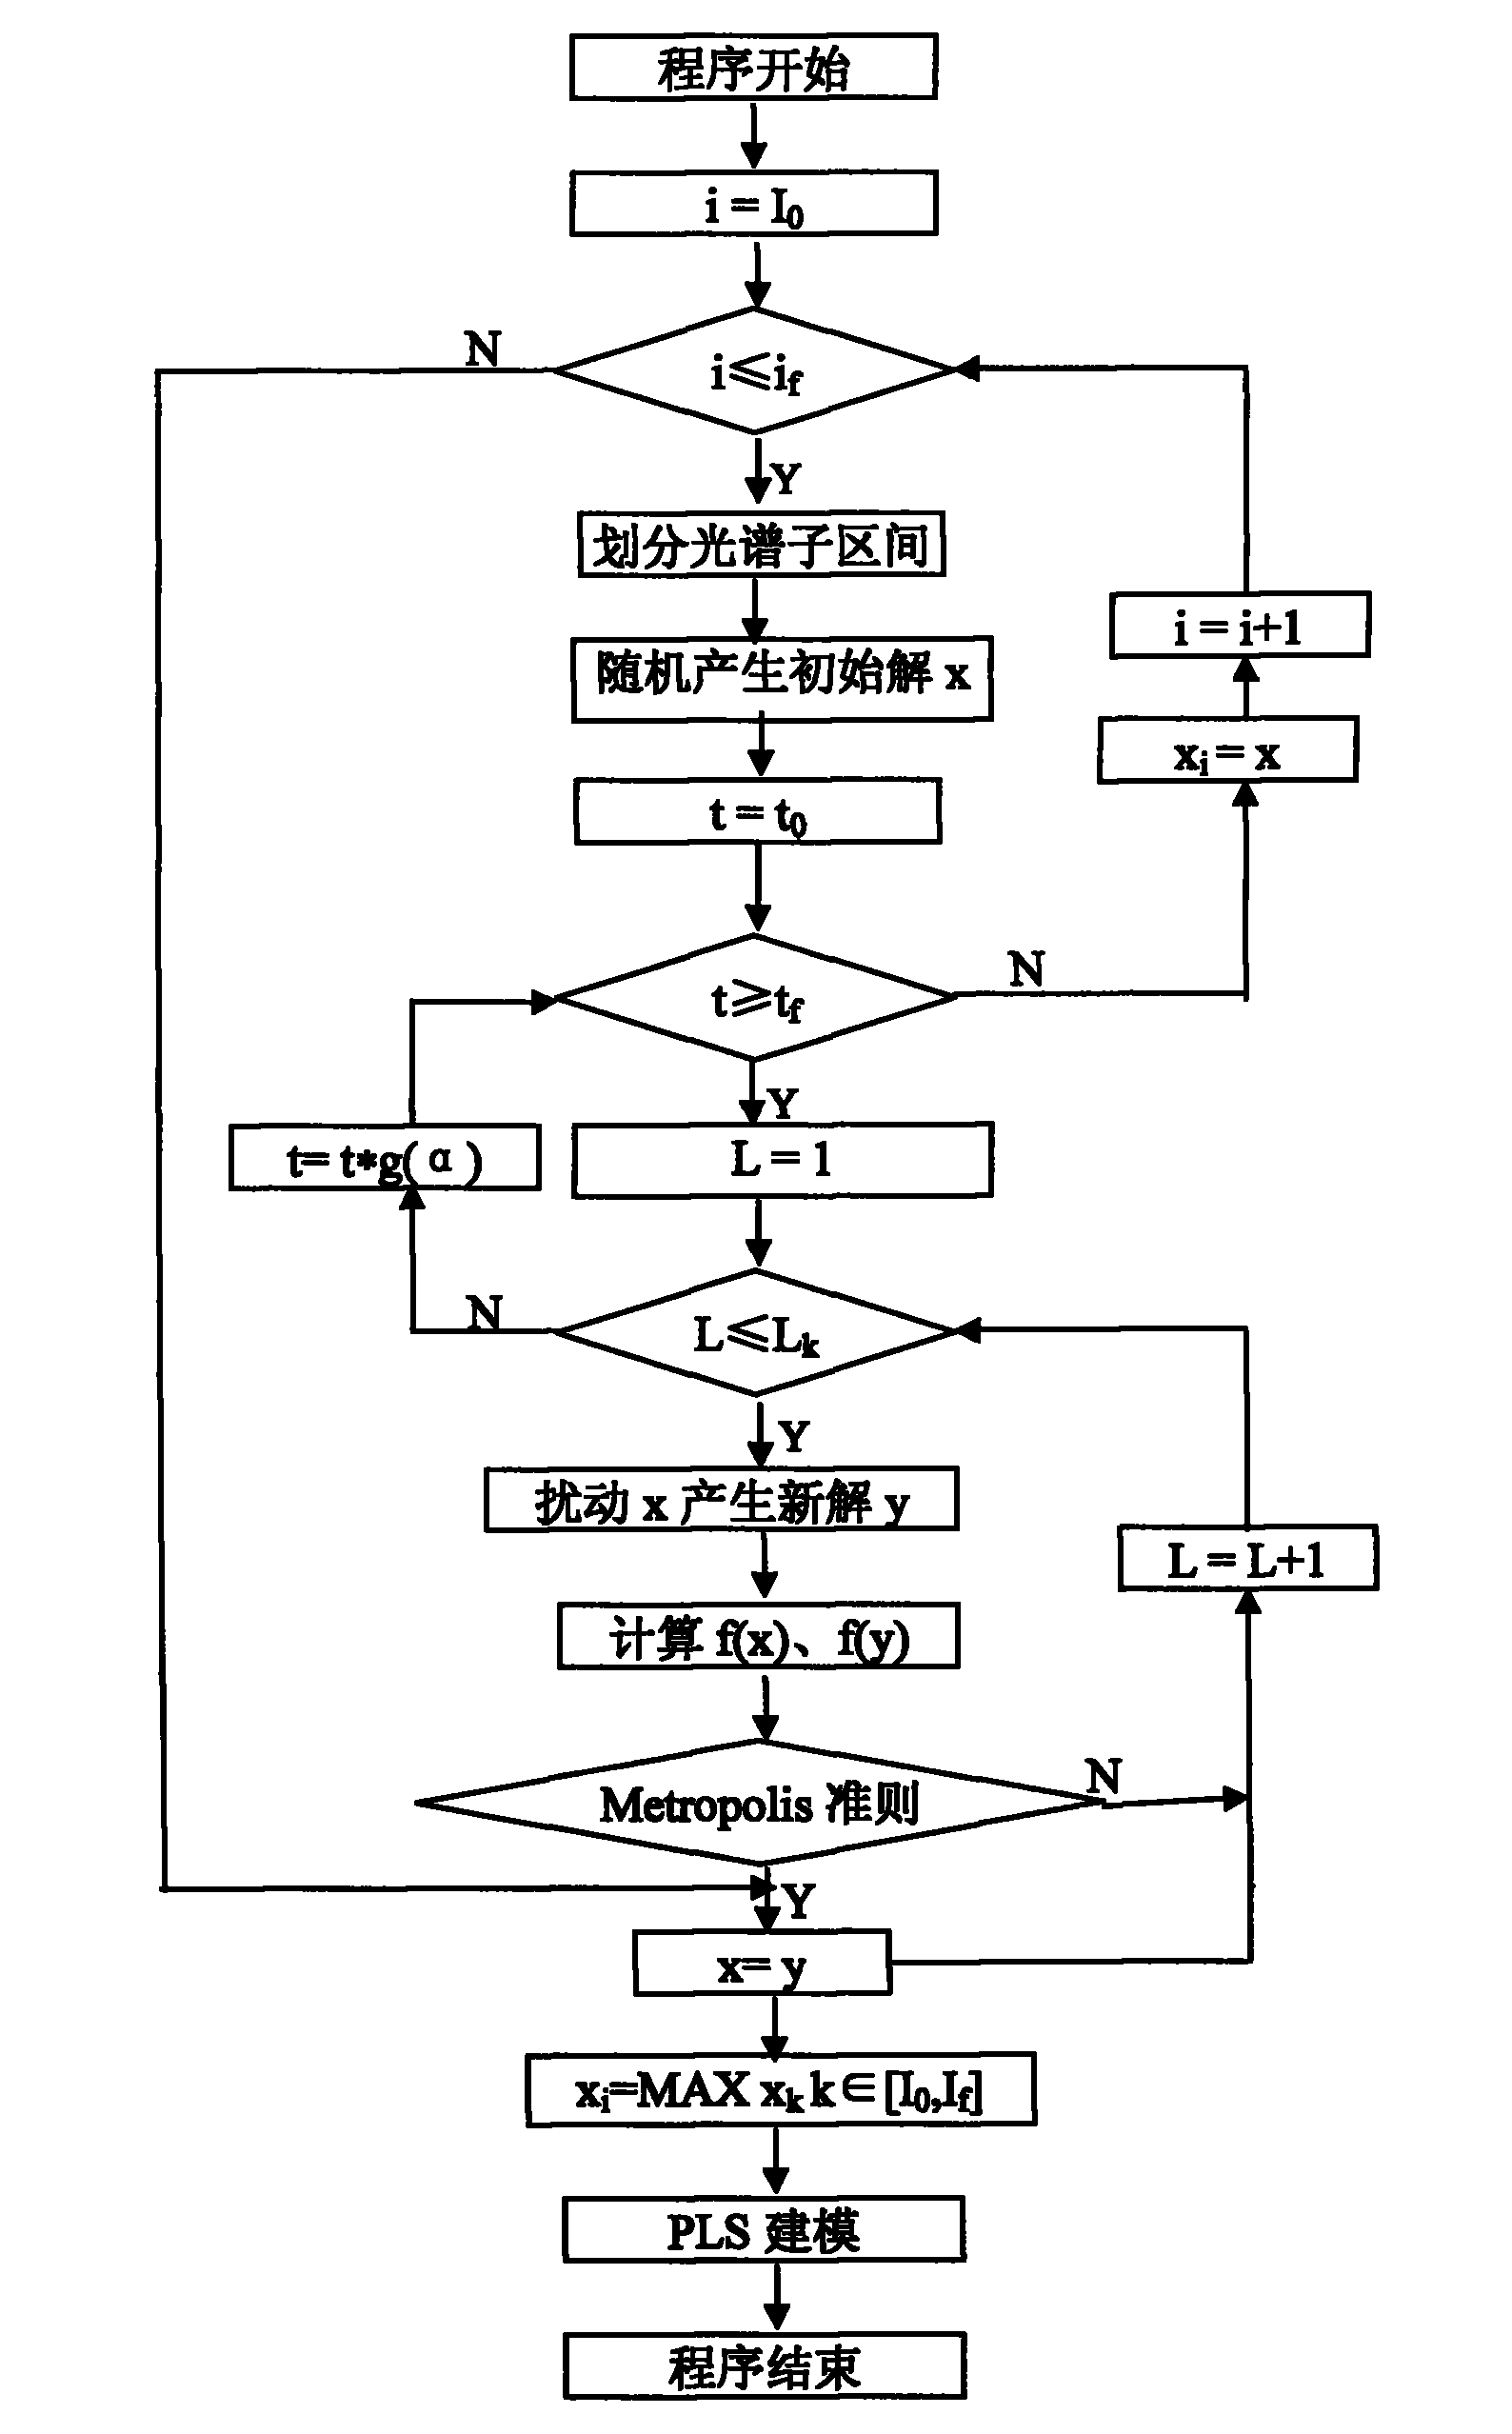 Method for selecting subinterval of near-infrared spectrum wavelength based on simulated annealing algorithm